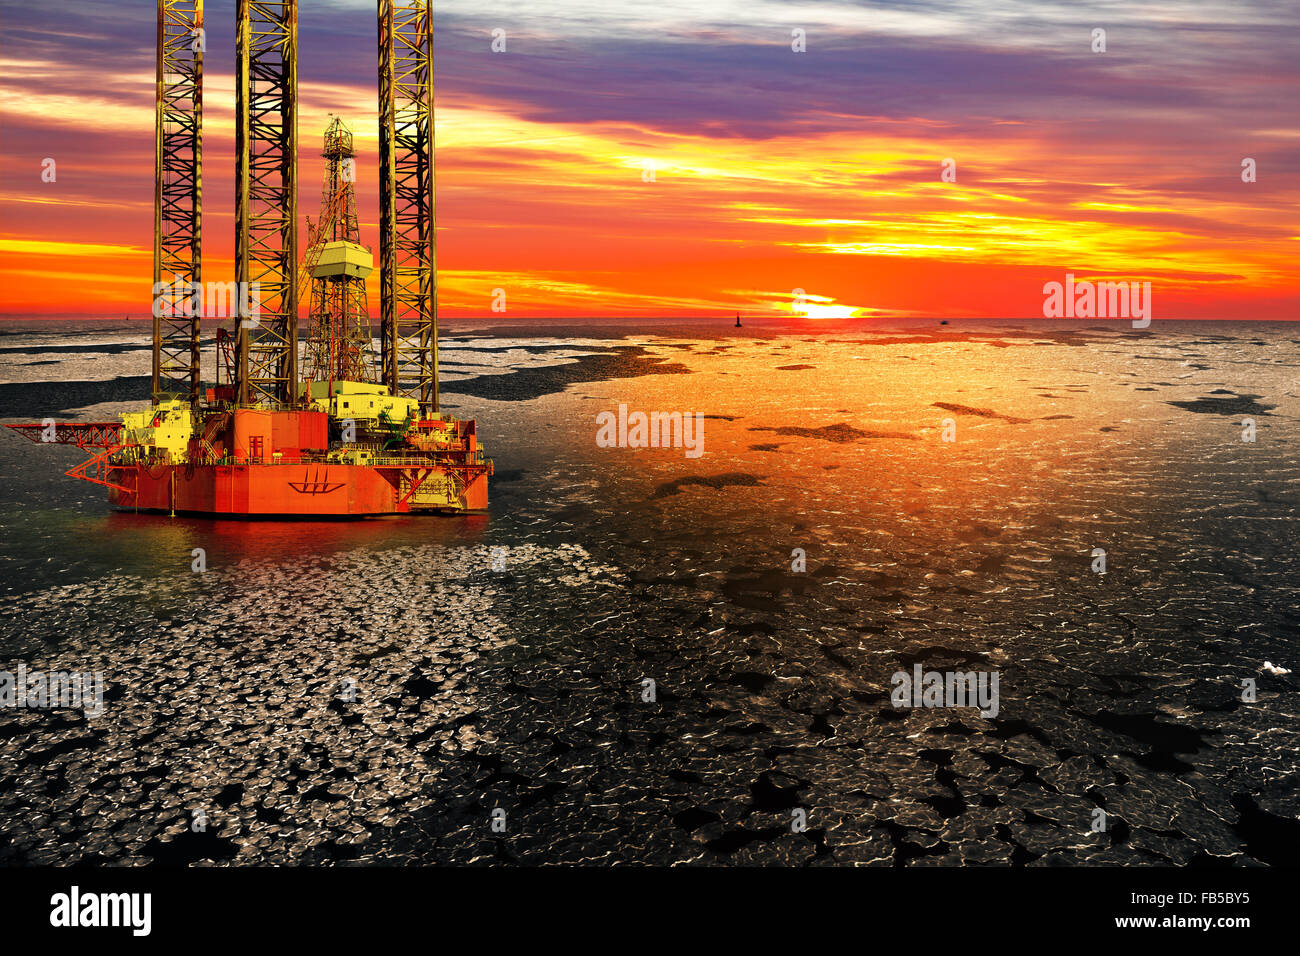 Offshore oil and rig platform in sunrise on frozen sea. Stock Photo